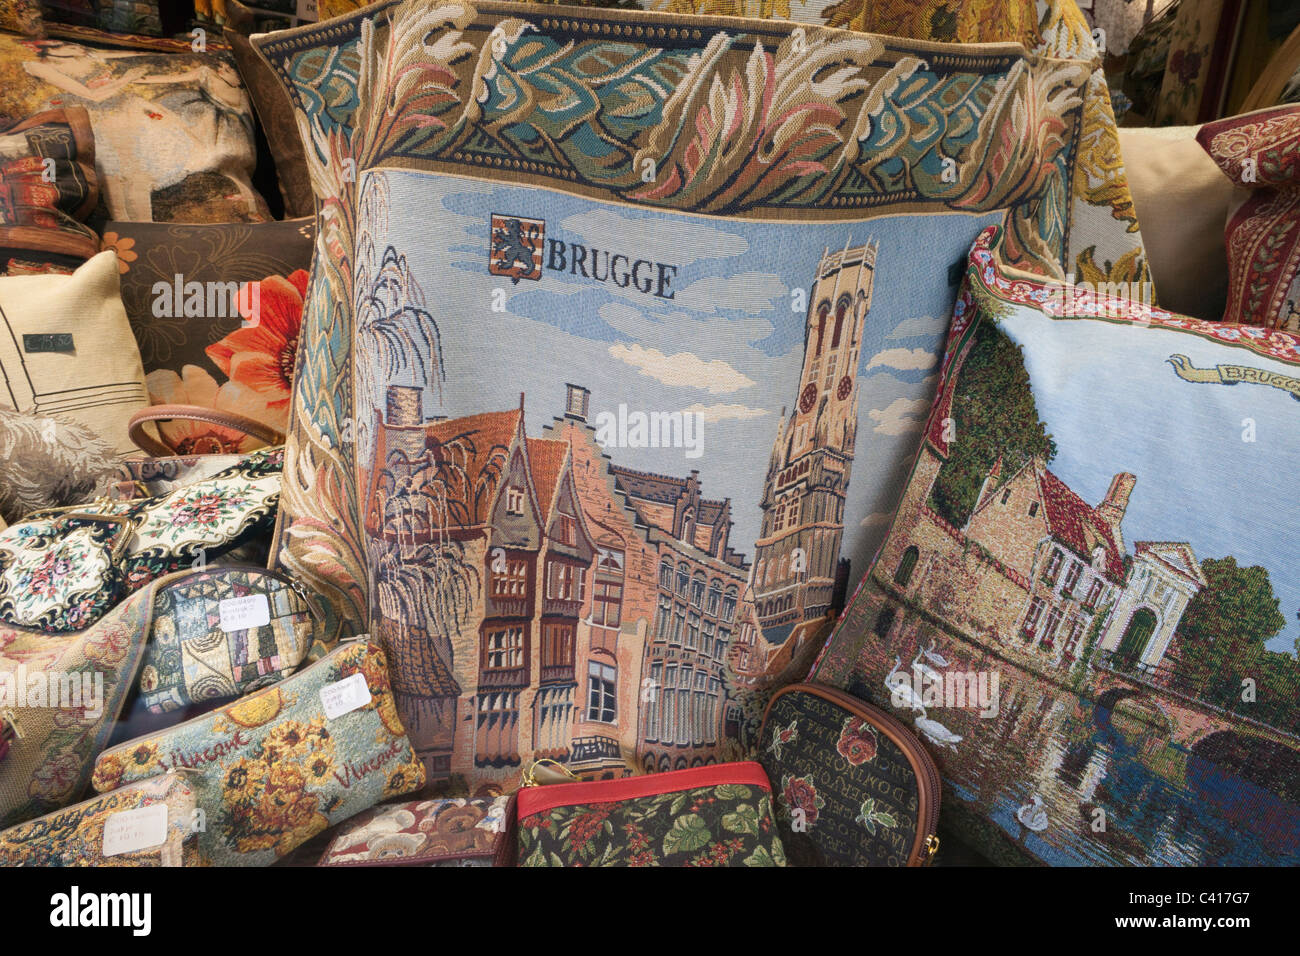 Europe, Belgium, Brugge, Bruges, Tapestry, Tapestries, UNESCO World Heritage, UNESCO, Tourism, Travel, Holiday, Vacation Stock Photo